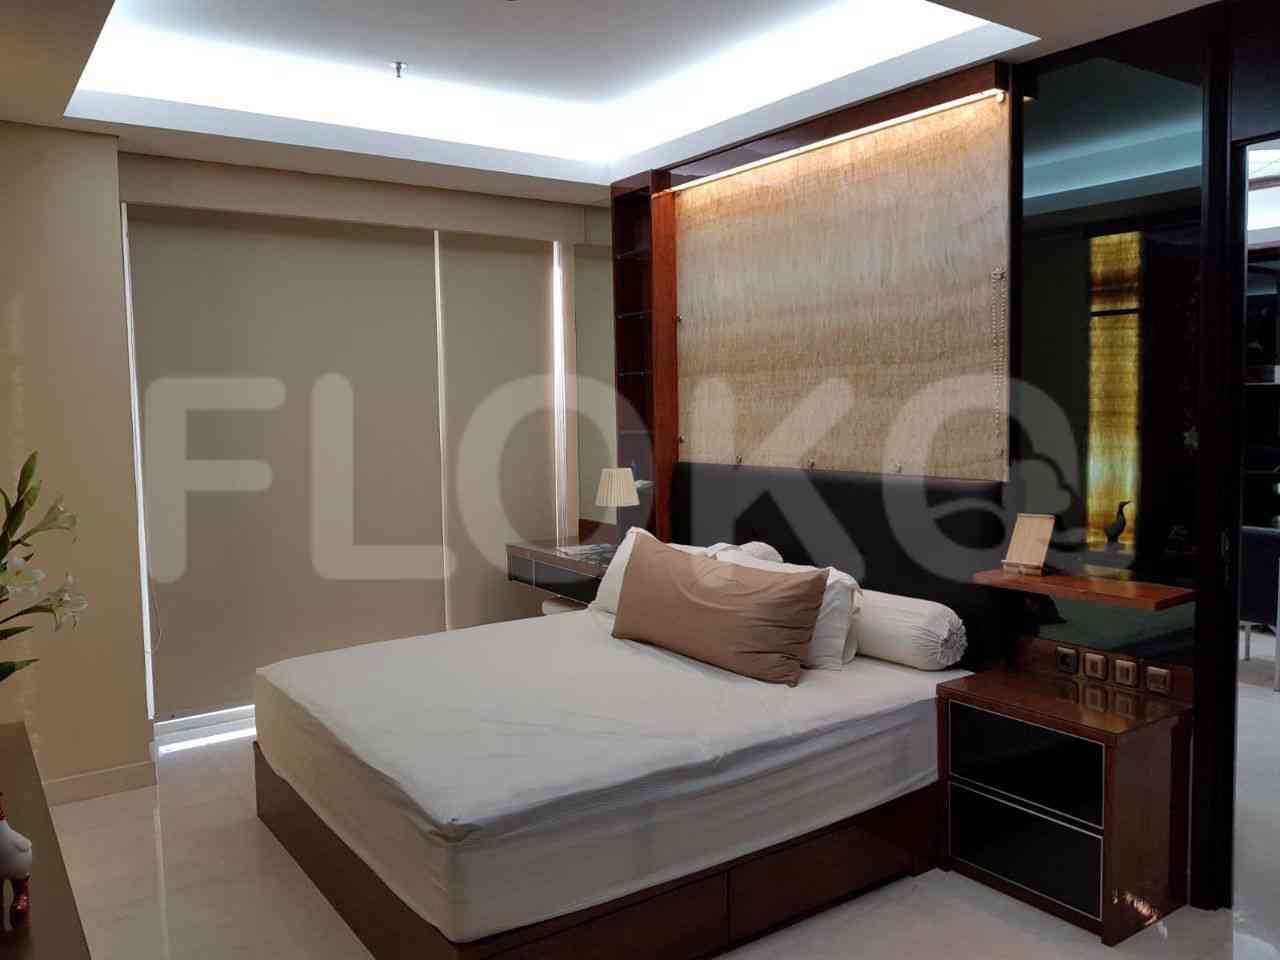 2 Bedroom on 17th Floor for Rent in Pondok Indah Residence - fpo7a5 2